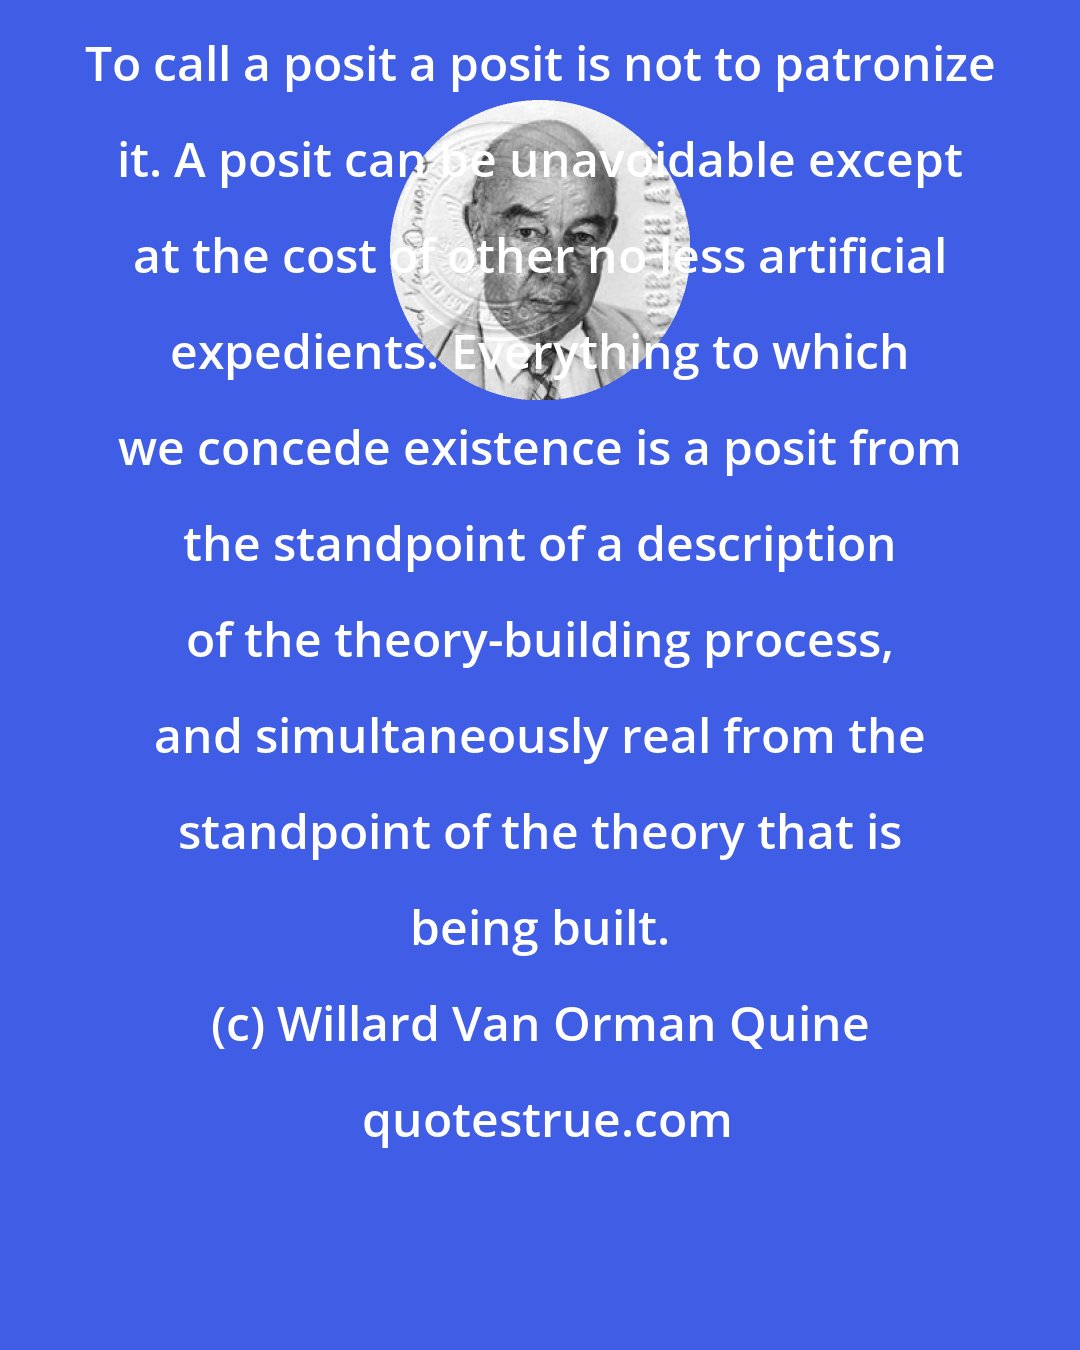 Willard Van Orman Quine: To call a posit a posit is not to patronize it. A posit can be unavoidable except at the cost of other no less artificial expedients. Everything to which we concede existence is a posit from the standpoint of a description of the theory-building process, and simultaneously real from the standpoint of the theory that is being built.